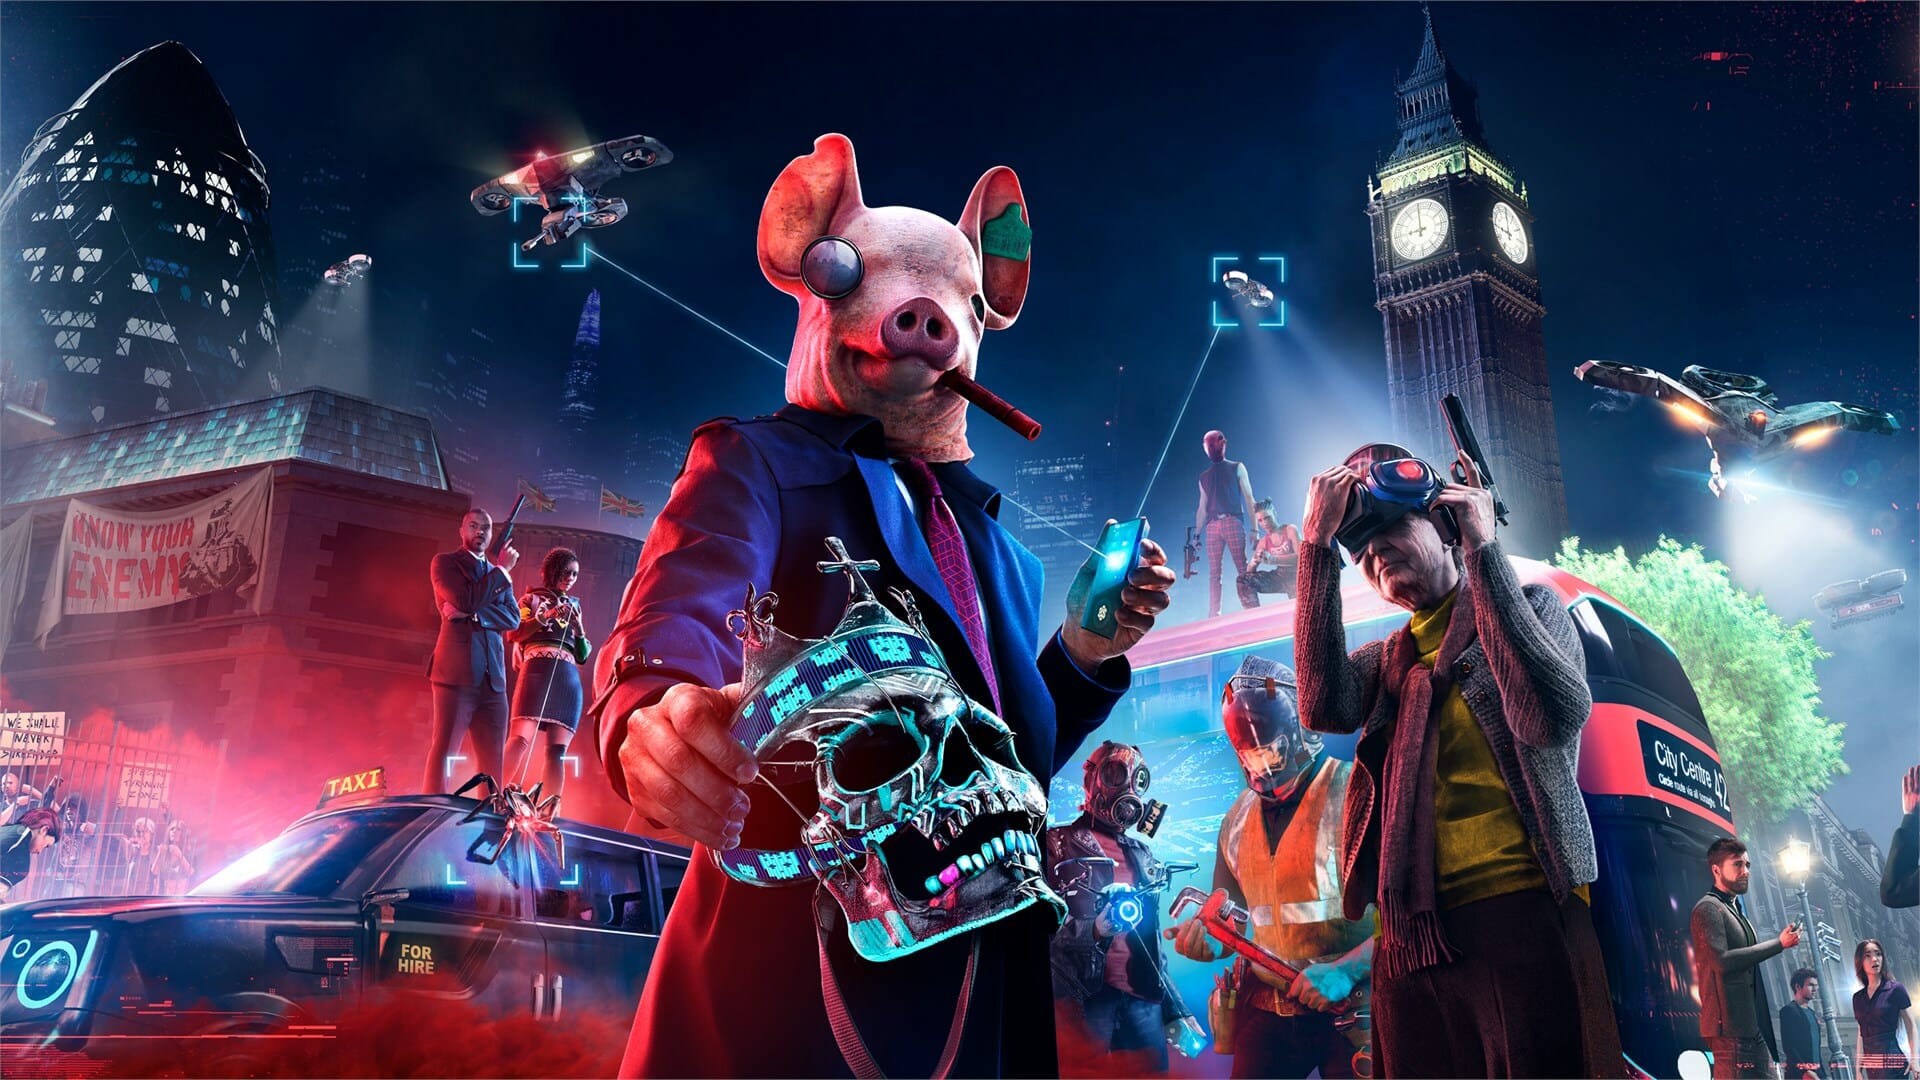 Watch Dogs Legion - Review - THE EMPIRE